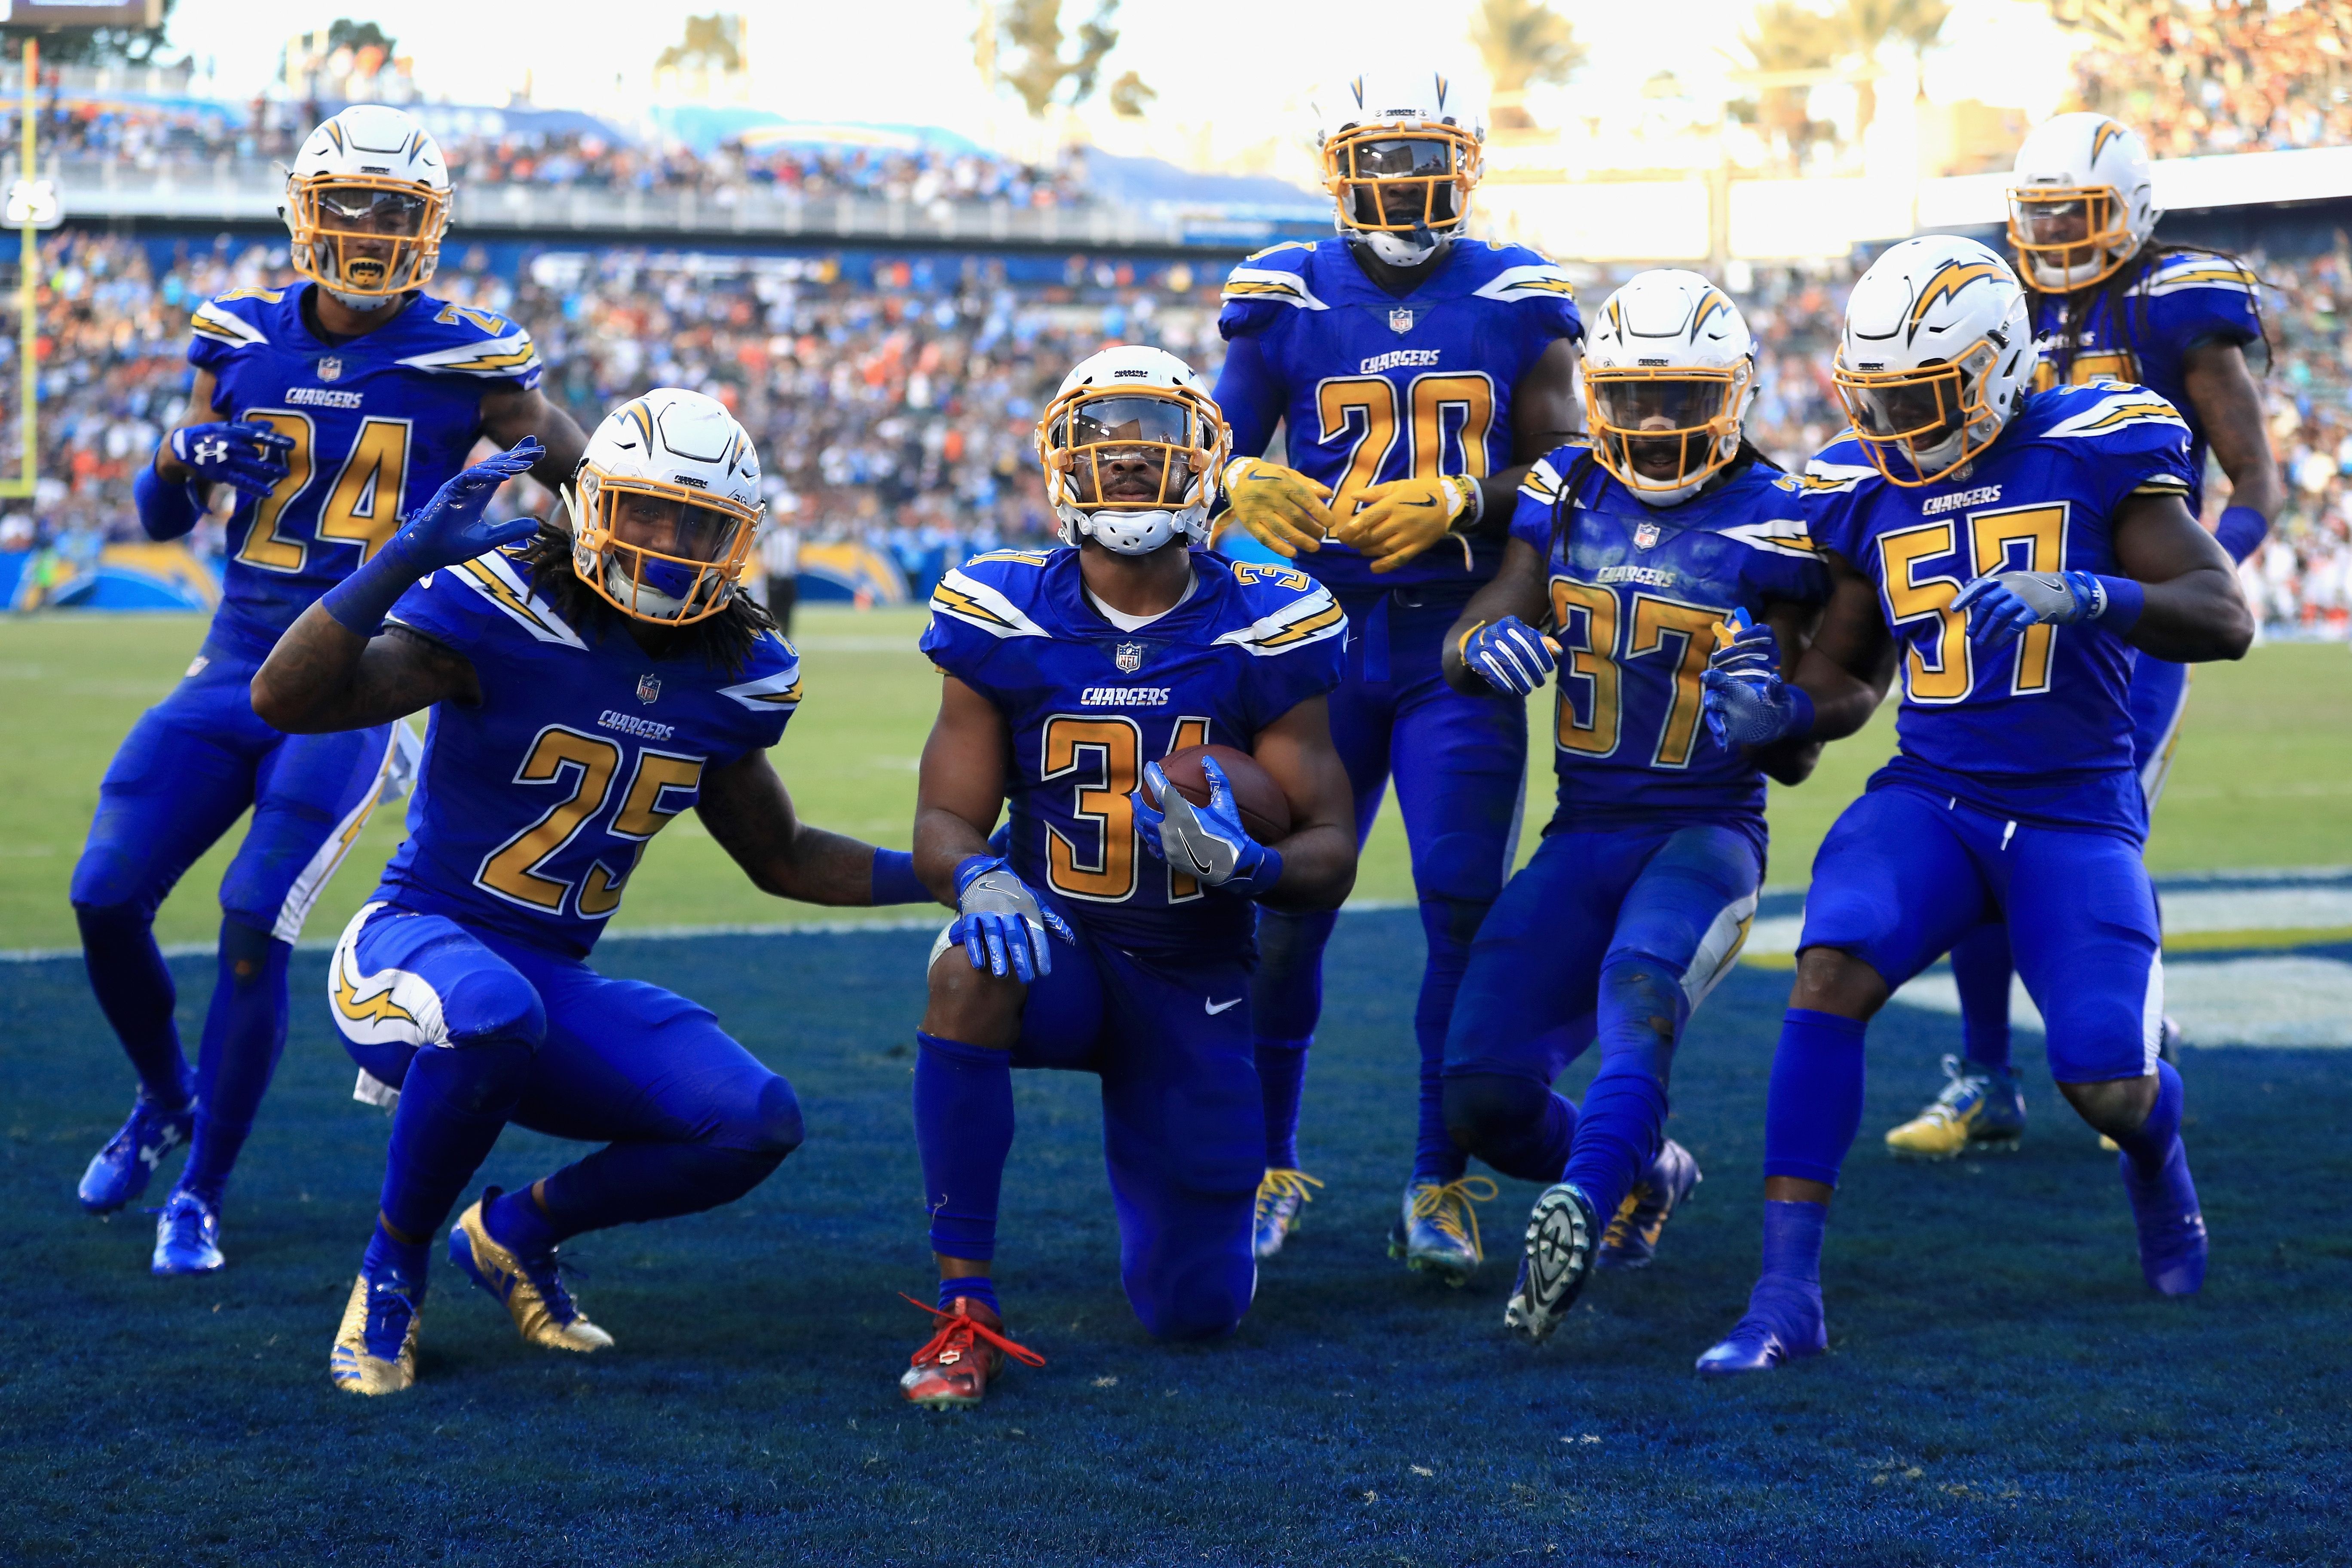 What the Chargers’ 2017 season has taught me